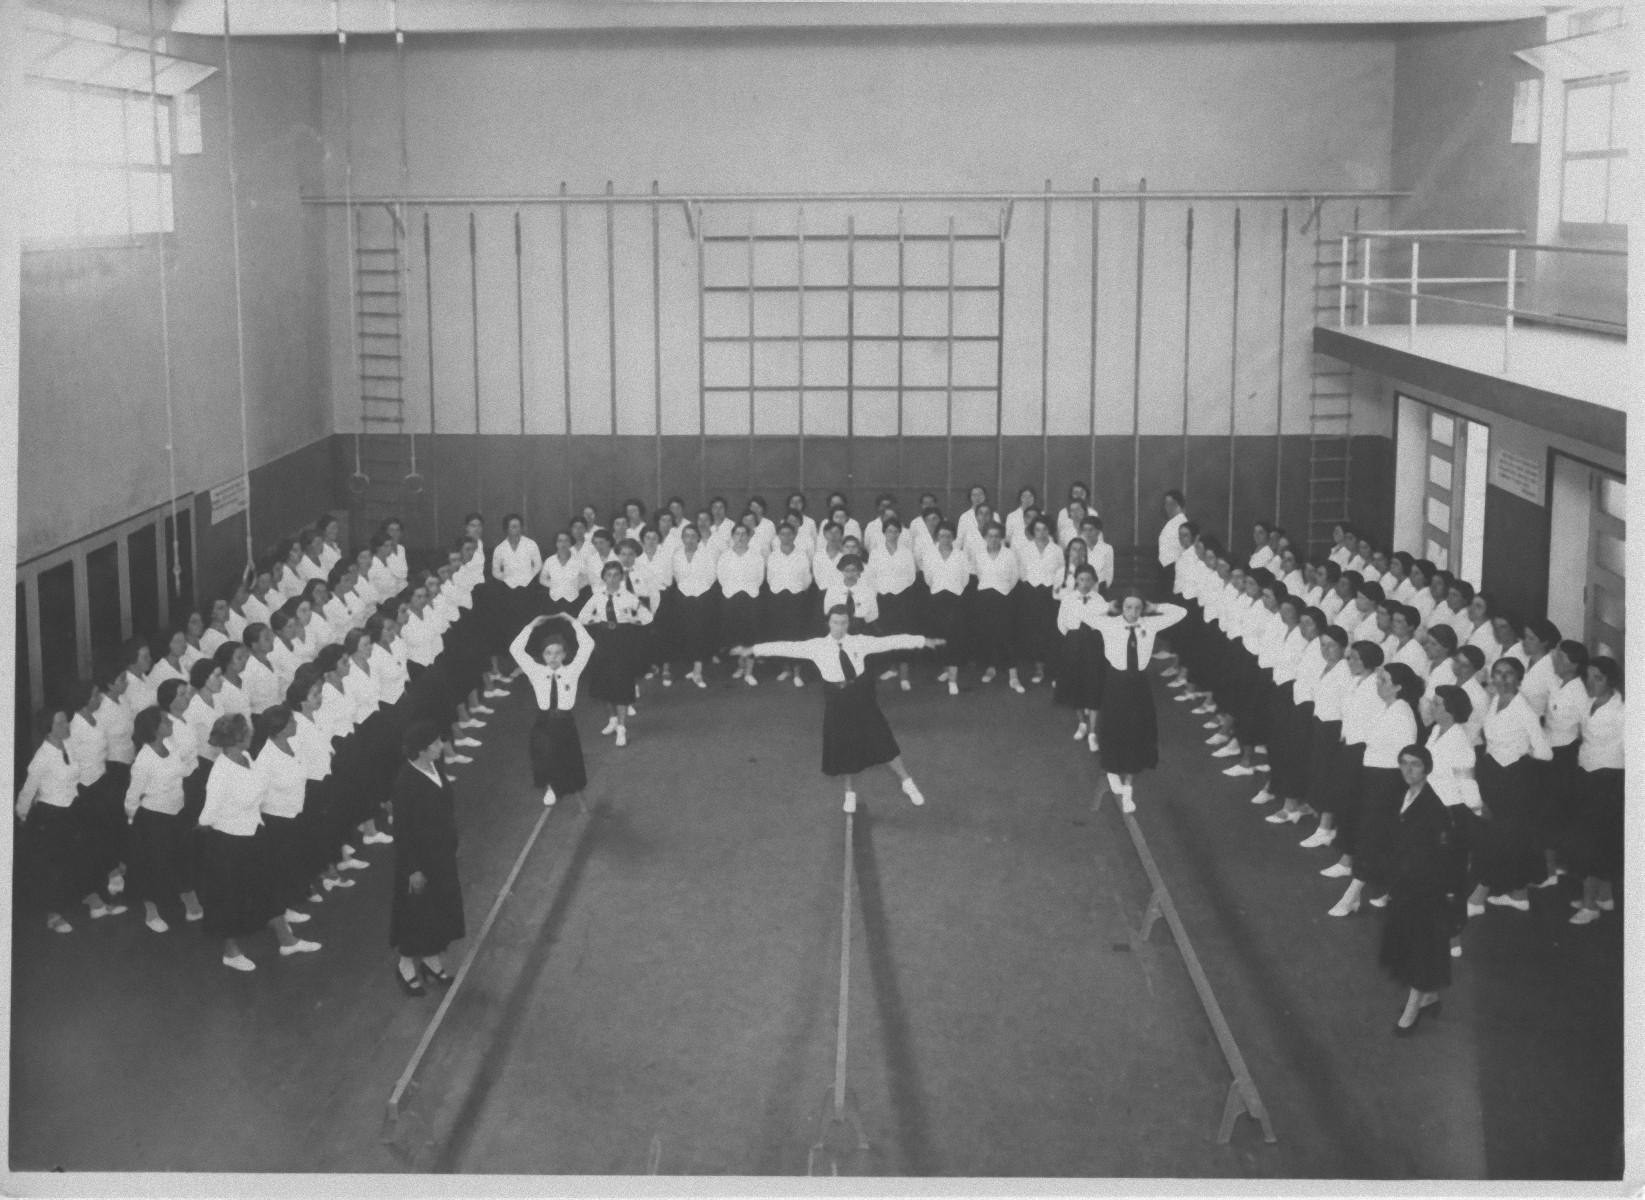 Unknown Figurative Photograph - Fascism - Physical Education in a School - Vintage b/w Photo - 1934 ca.